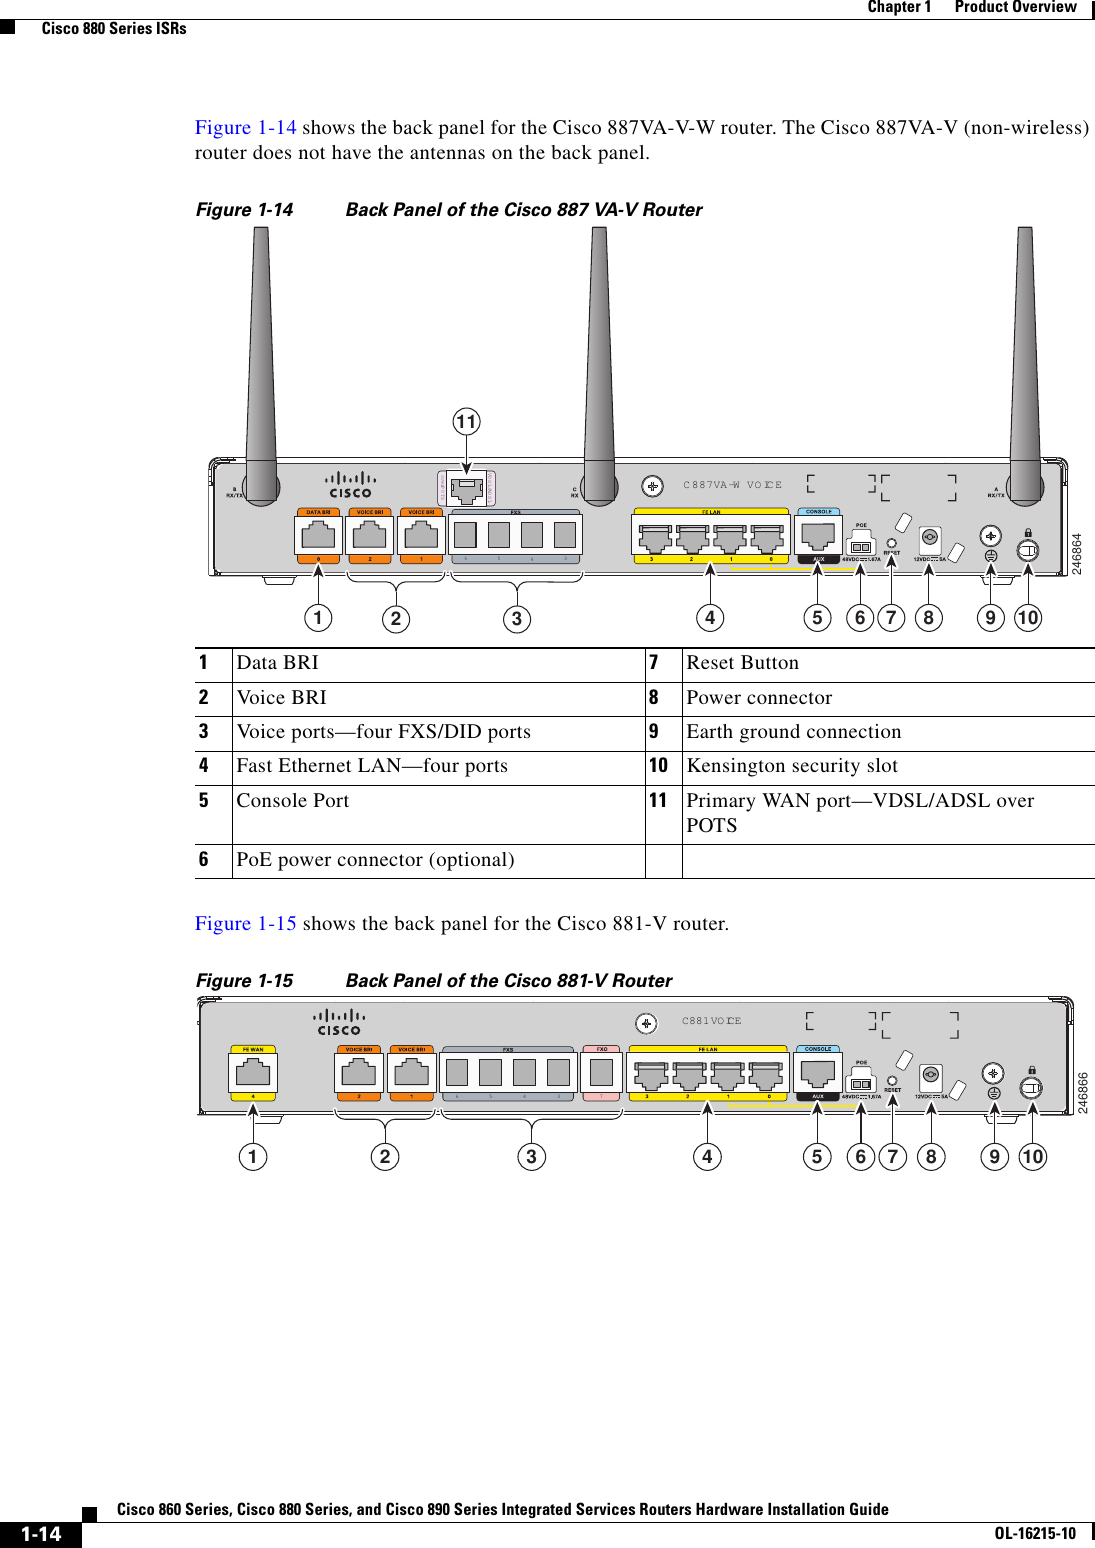  1-14Cisco 860 Series, Cisco 880 Series, and Cisco 890 Series Integrated Services Routers Hardware Installation GuideOL-16215-10Chapter 1      Product Overview  Cisco 880 Series ISRsFigure 1-14 shows the back panel for the Cisco 887VA-V-W router. The Cisco 887VA-V (non-wireless) router does not have the antennas on the back panel.Figure 1-14 Back Panel of the Cisco 887 VA-V RouterFigure 1-15 shows the back panel for the Cisco 881-V router. Figure 1-15 Back Panel of the Cisco 881-V Router246864overP O TSVDSL/AD SLC887VA-W  VOICE34561 4 5 6 8 9 10732111Data BRI 7Reset Button2Voice BRI 8Power connector3Voice ports—four FXS/DID ports 9  Earth ground connection4Fast Ethernet LAN—four ports 10 Kensington security slot5Console Port 11 Primary WAN port—VDSL/ADSL over POTS6PoE power connector (optional) 246866C881  VOICE3456 71 4 5 6 8 9 10732